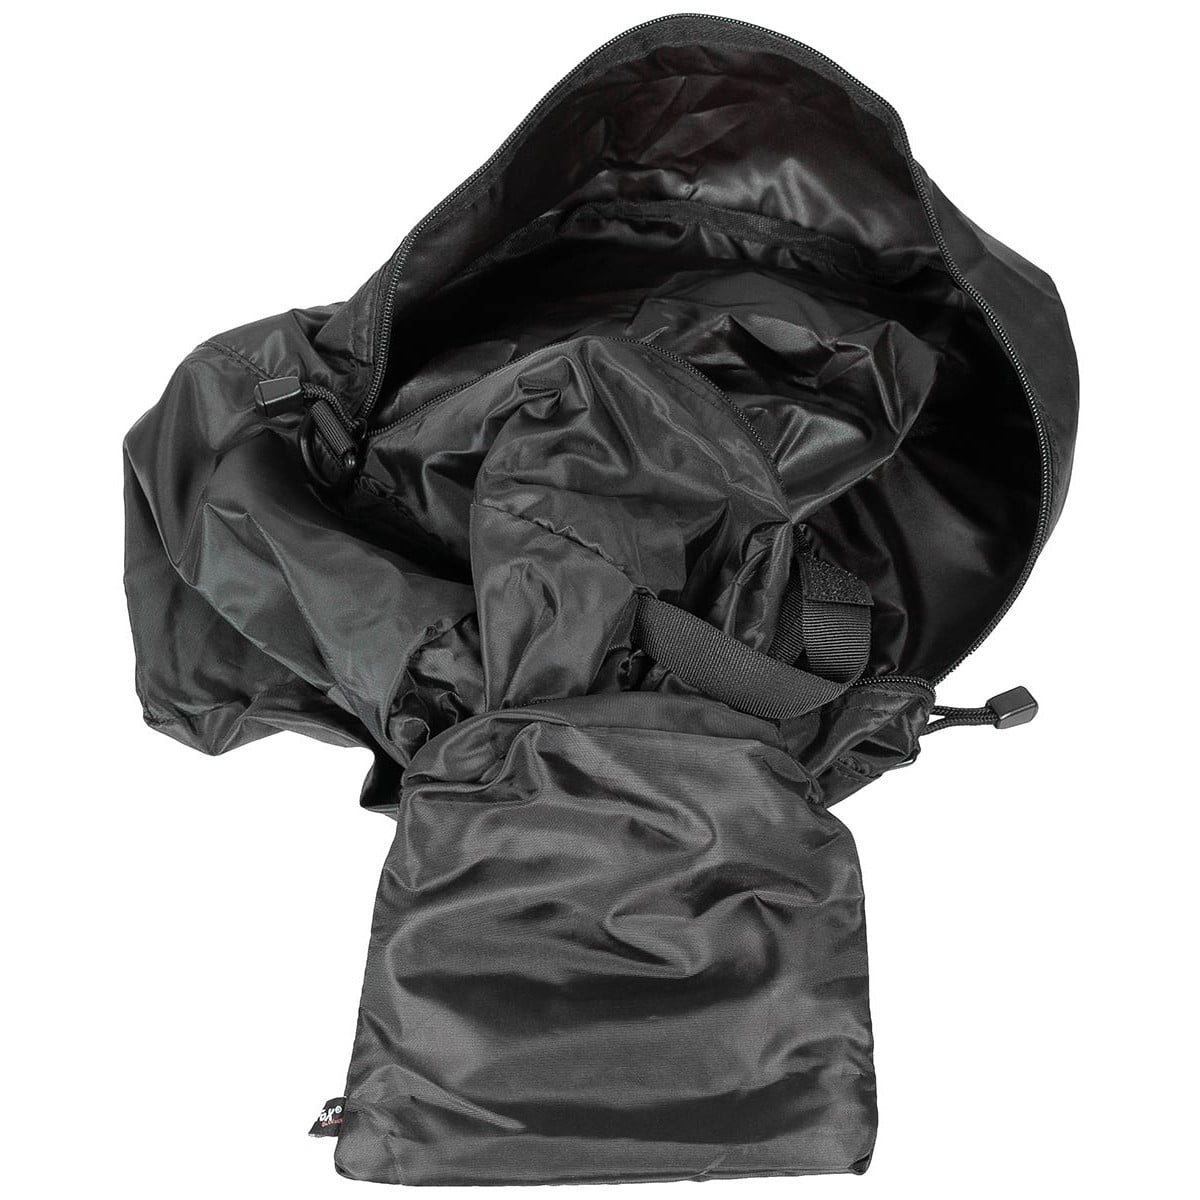 MFH int. comp. Light and collapsible transport bag BLACK | Army surplus ...